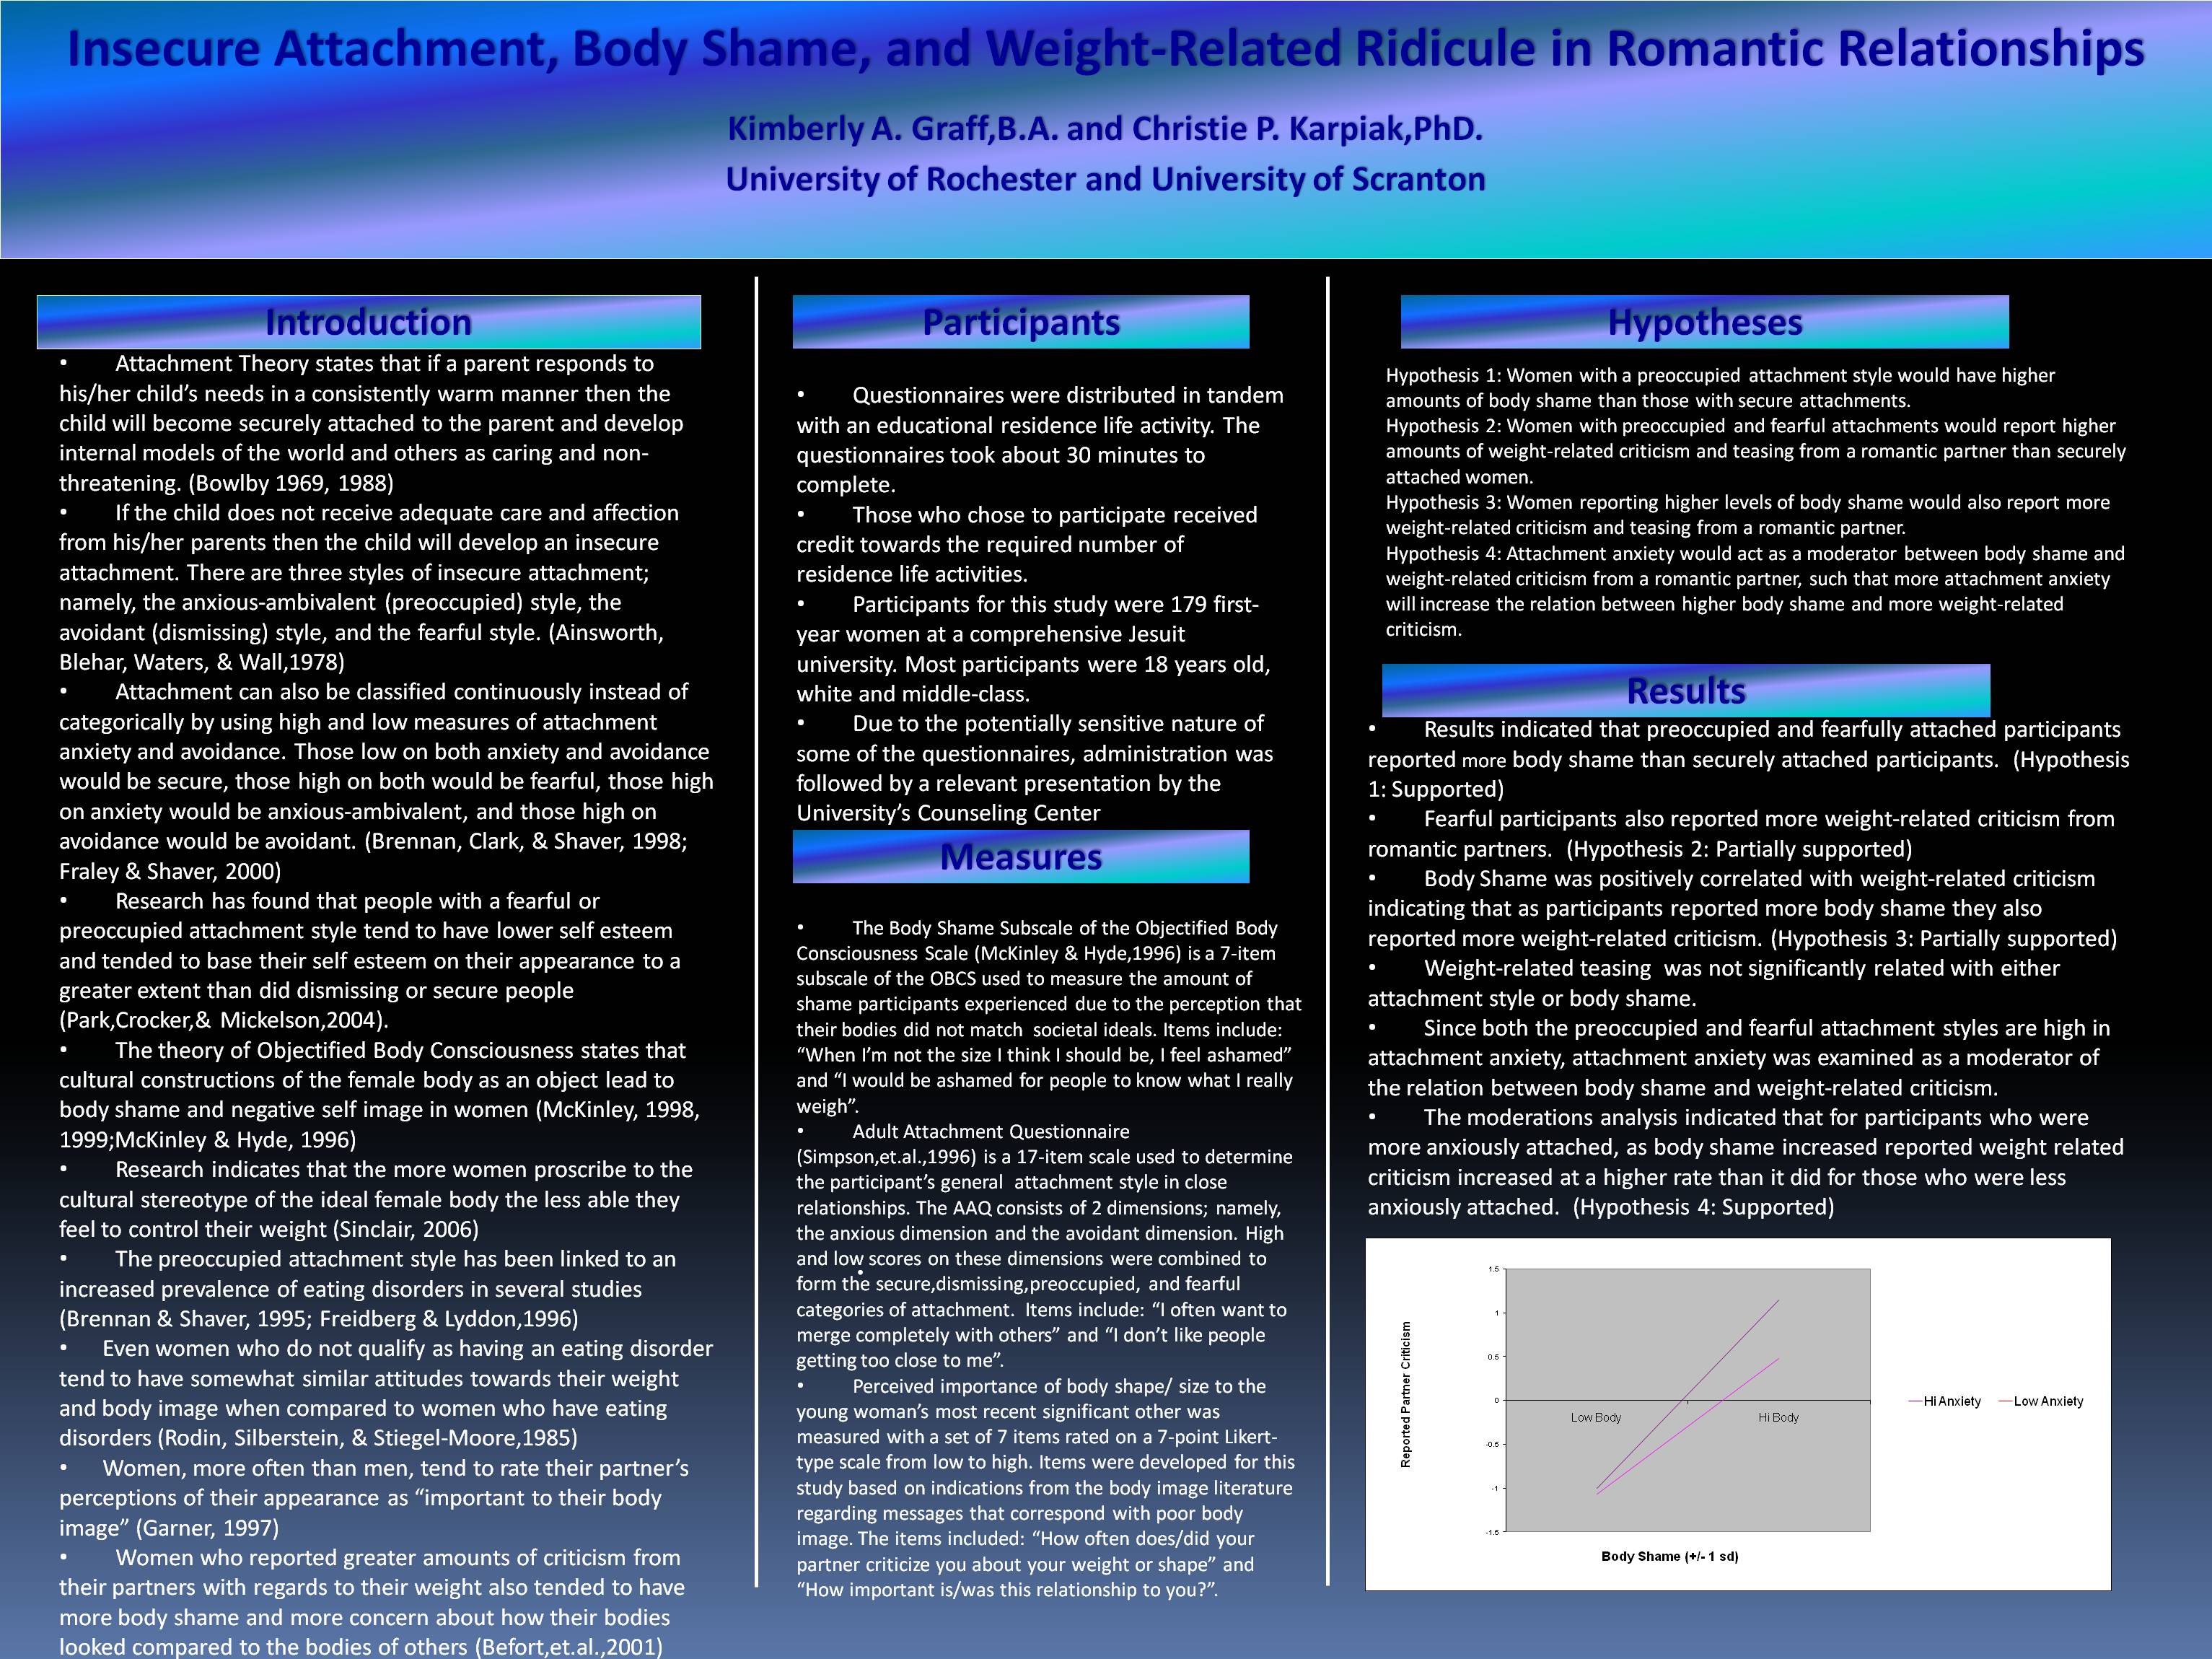 Poster image: Attachment, Body Shame, and Weight-Related Ridicule in Romantic Relationships